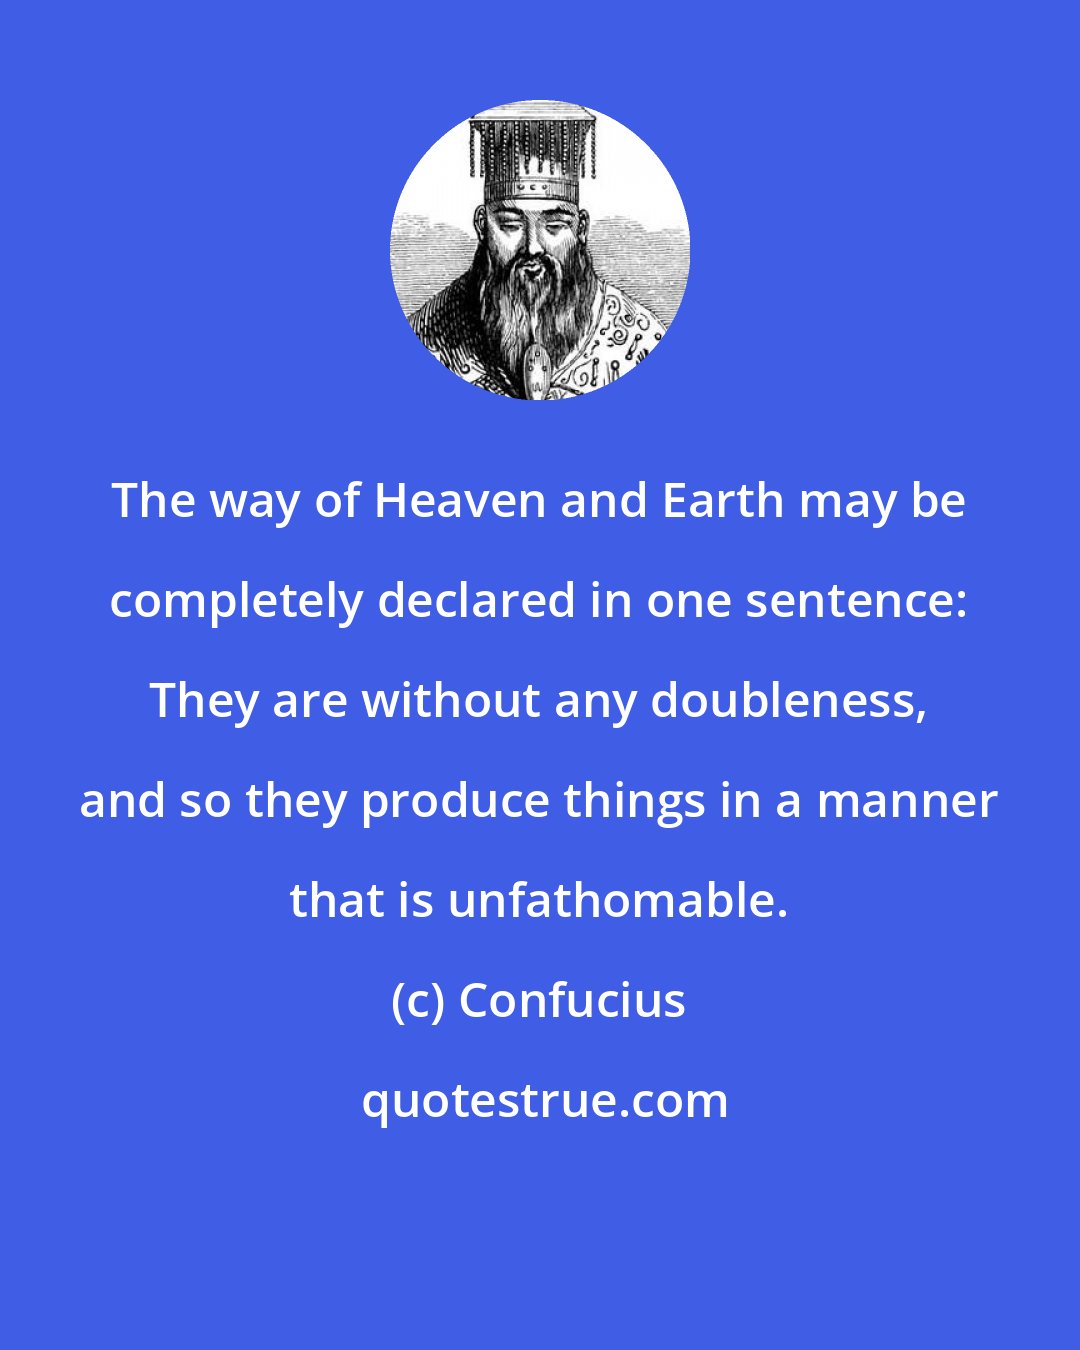 Confucius: The way of Heaven and Earth may be completely declared in one sentence: They are without any doubleness, and so they produce things in a manner that is unfathomable.